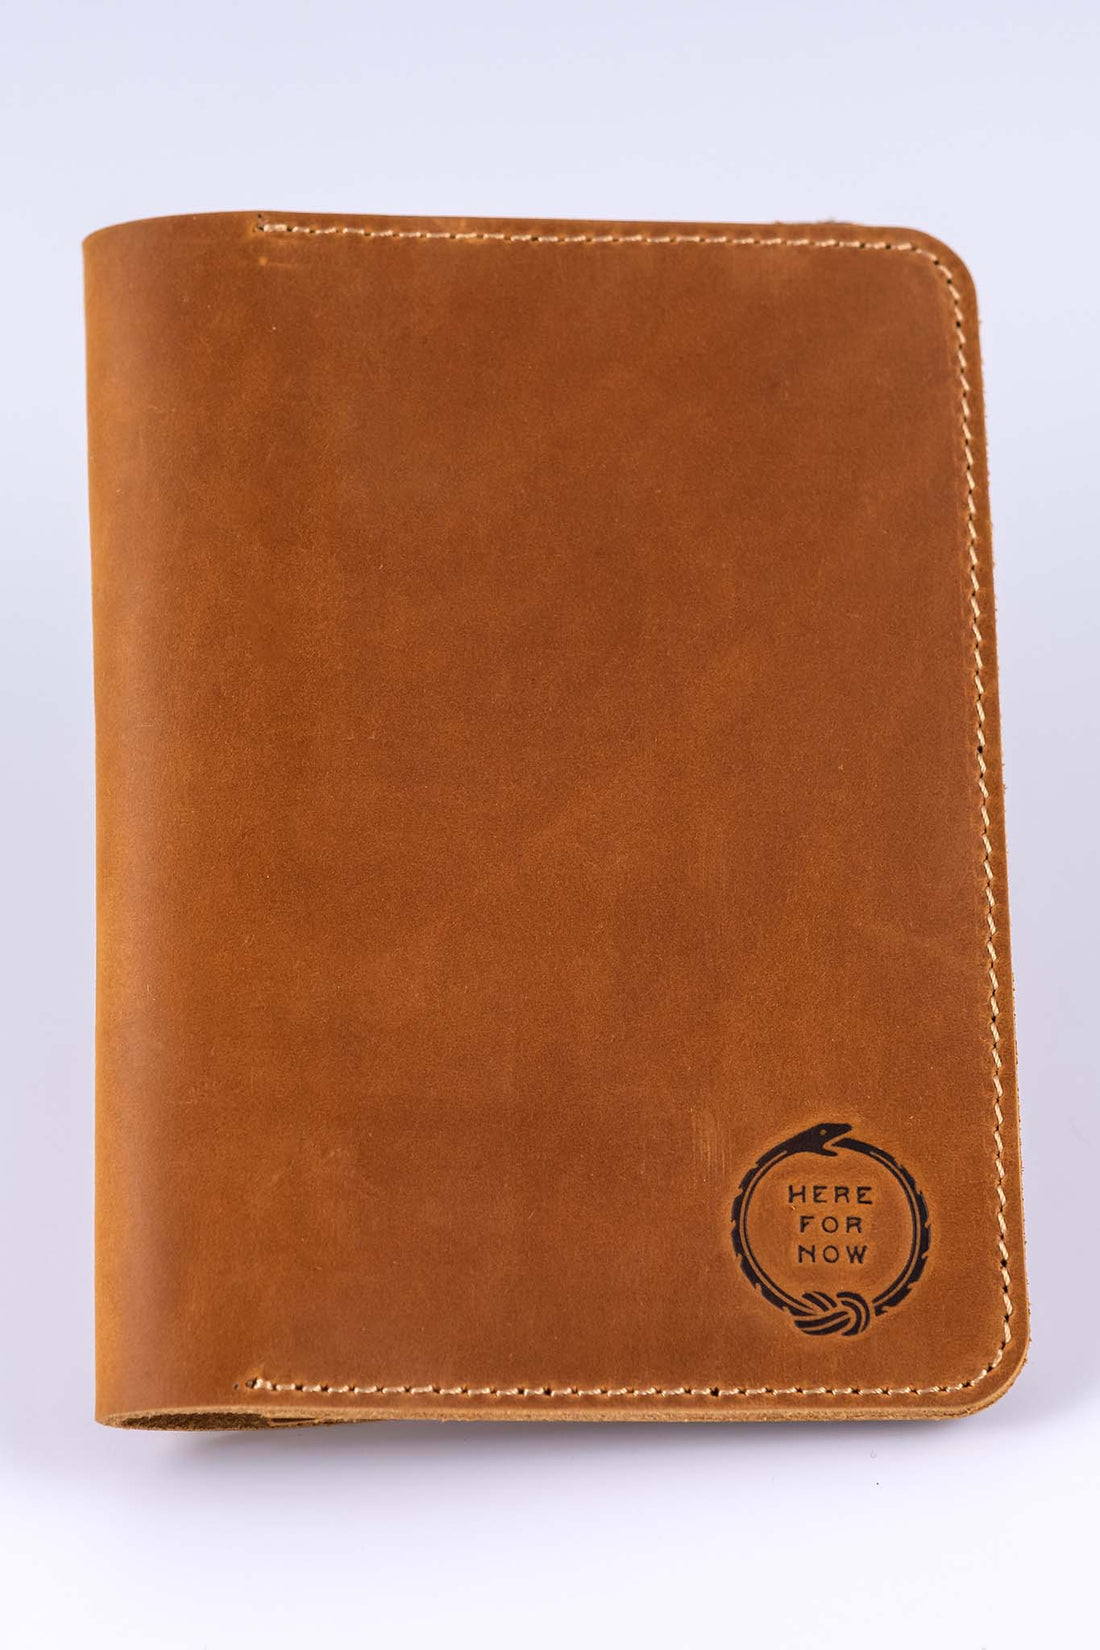 Brown leather field notes wallet closed to show the front embossed with the "Here For Now" Ouroboros design and light colored tan stitching